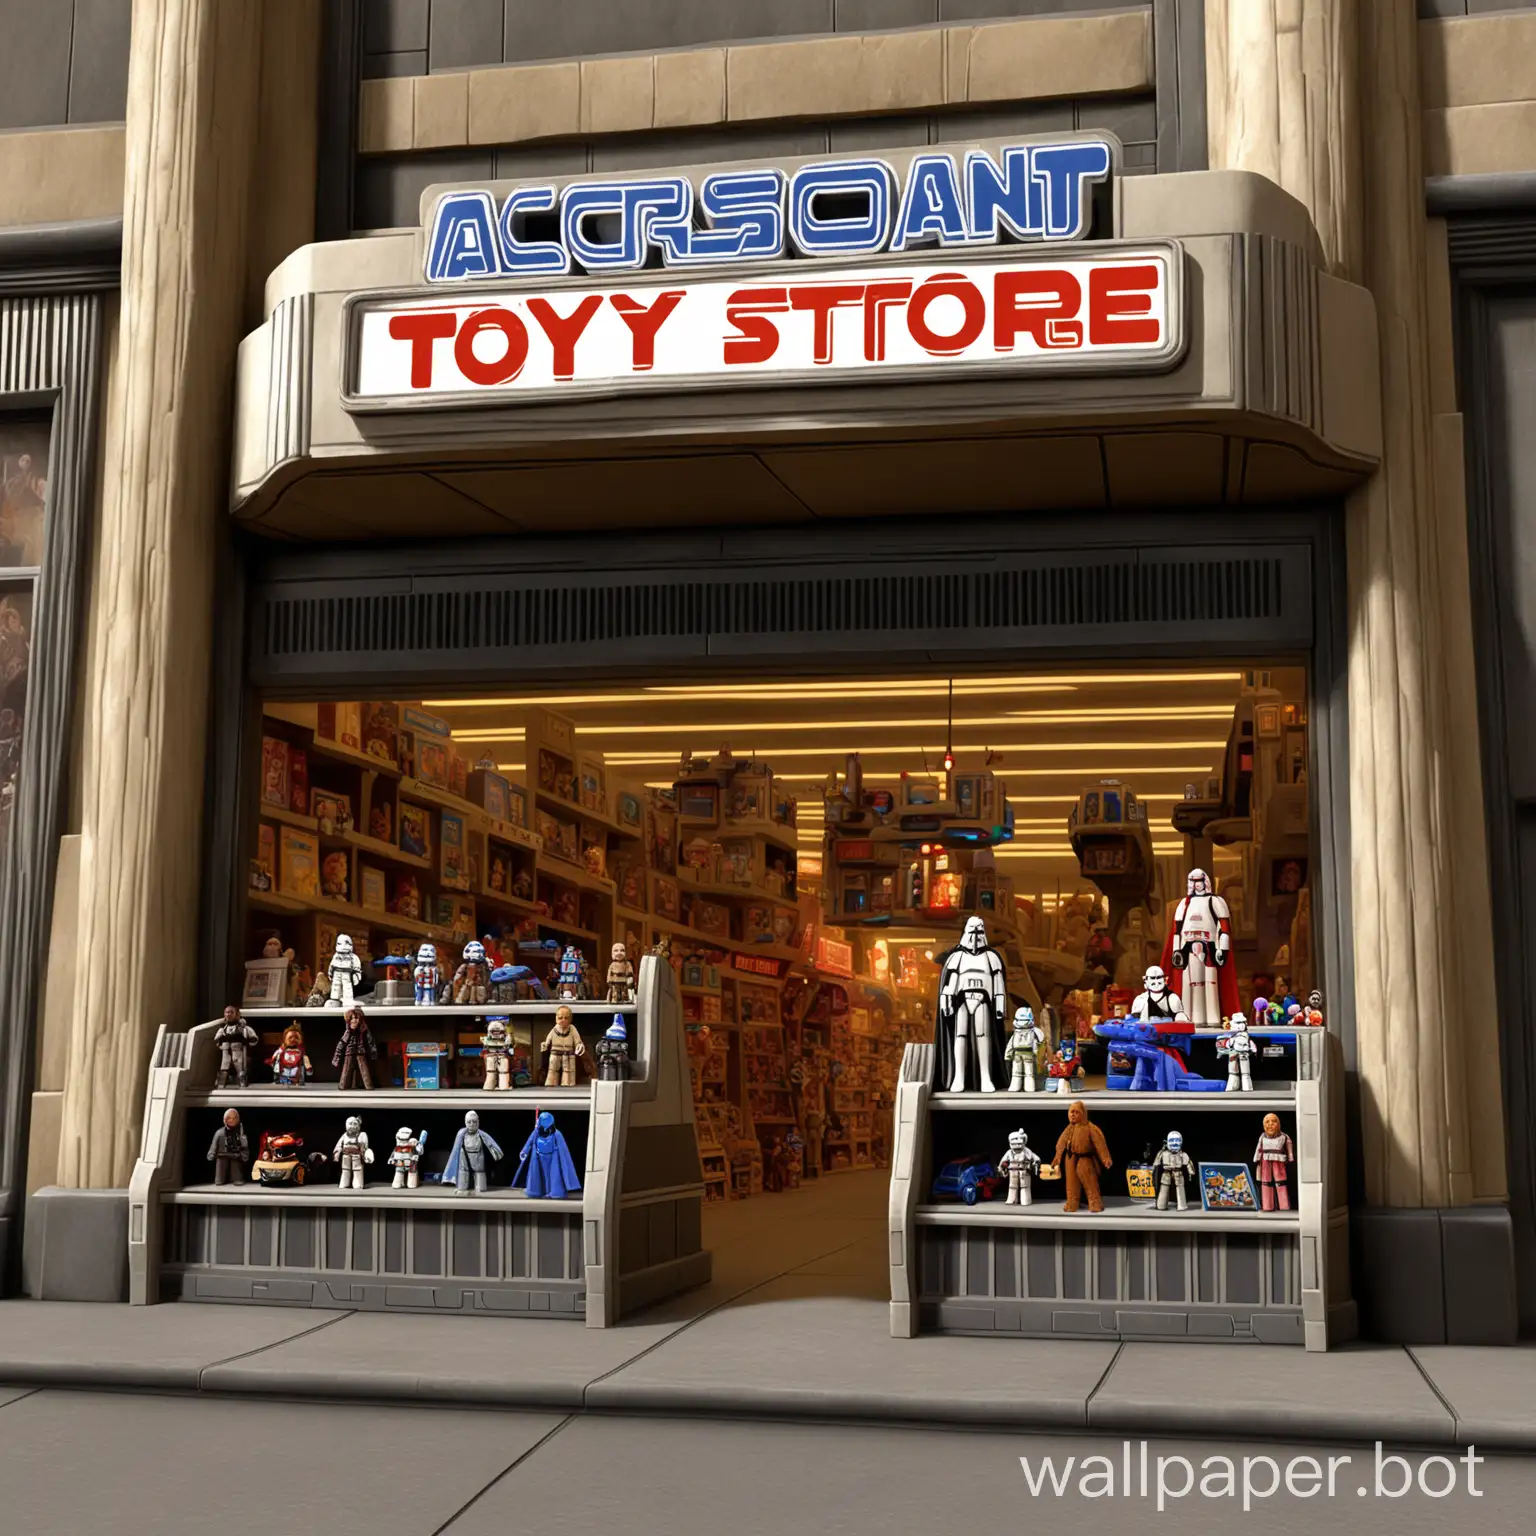 A toy store on Coruscant exterior